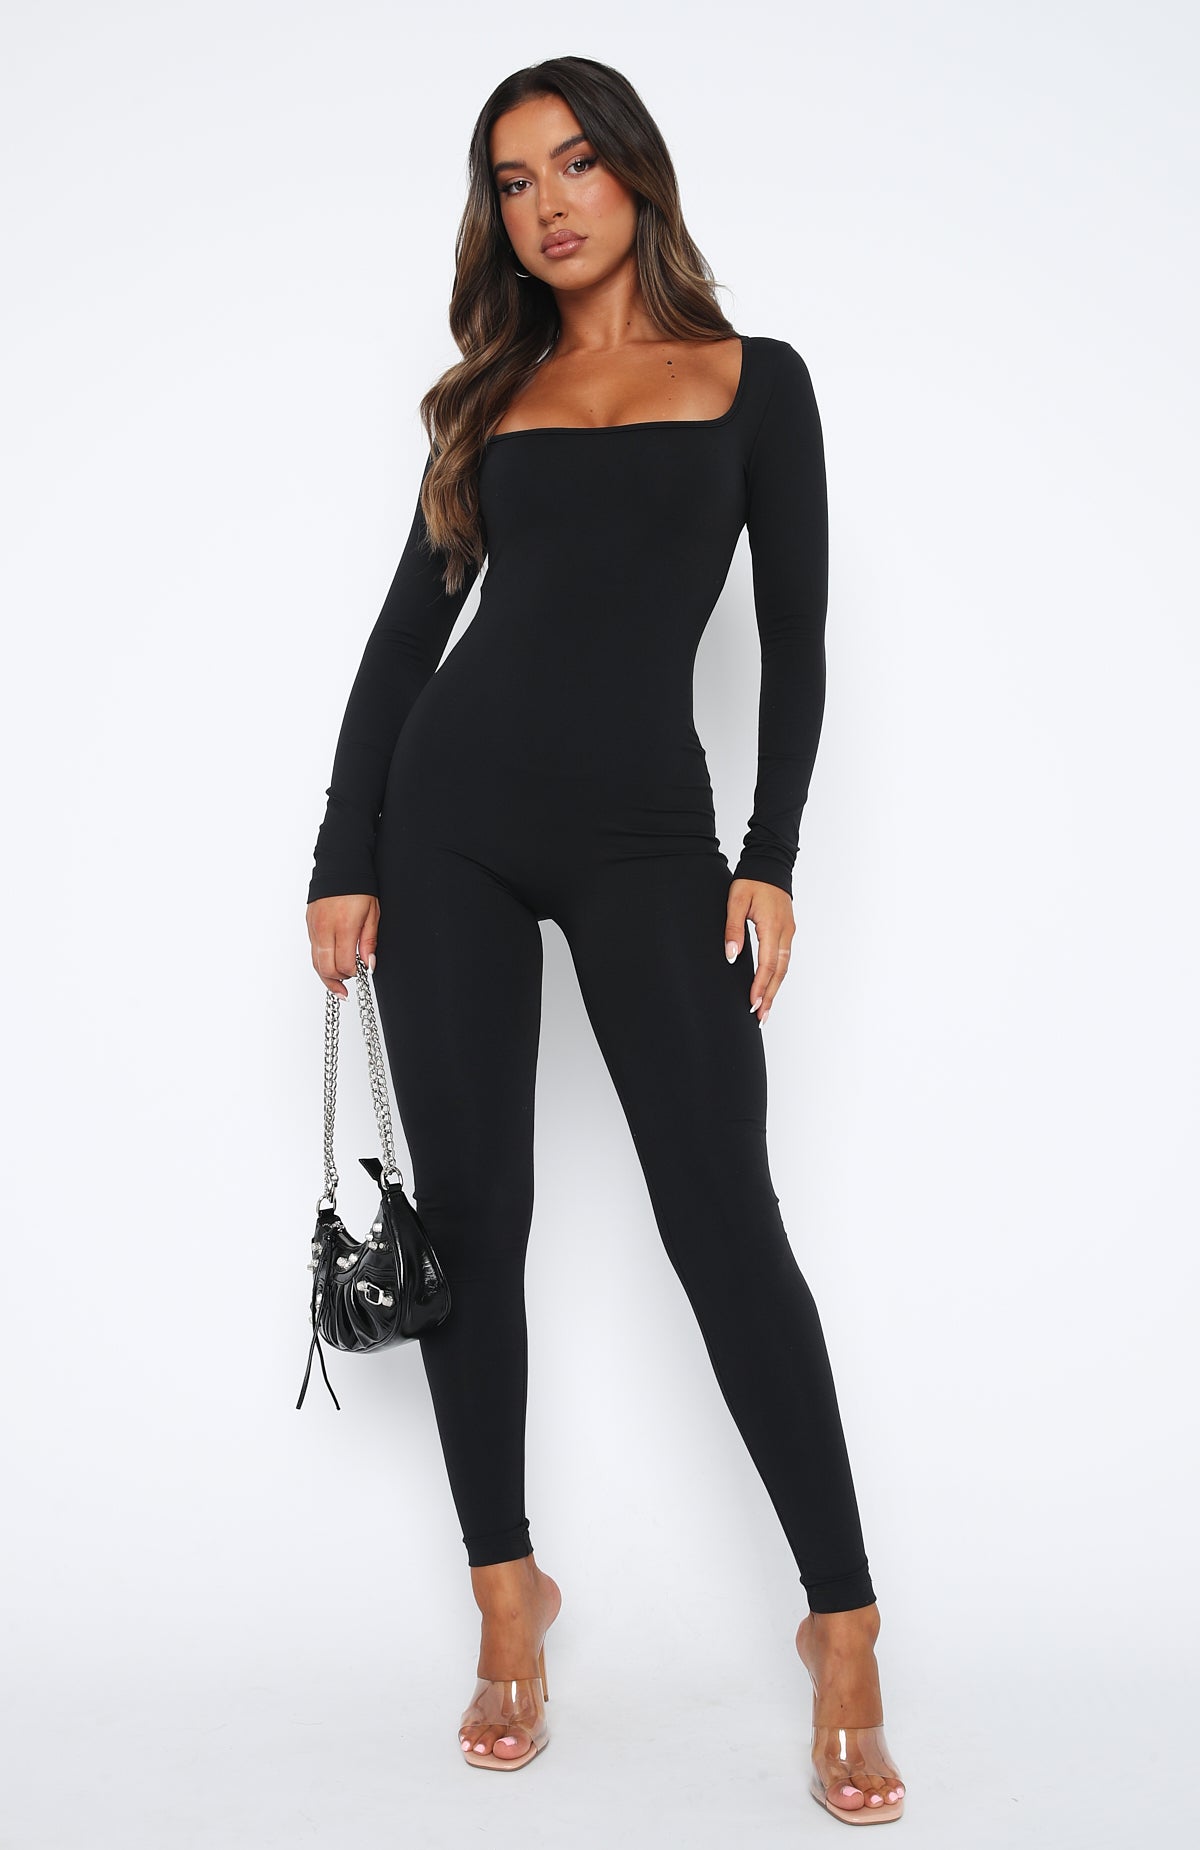 How to style a black jumpsuit?